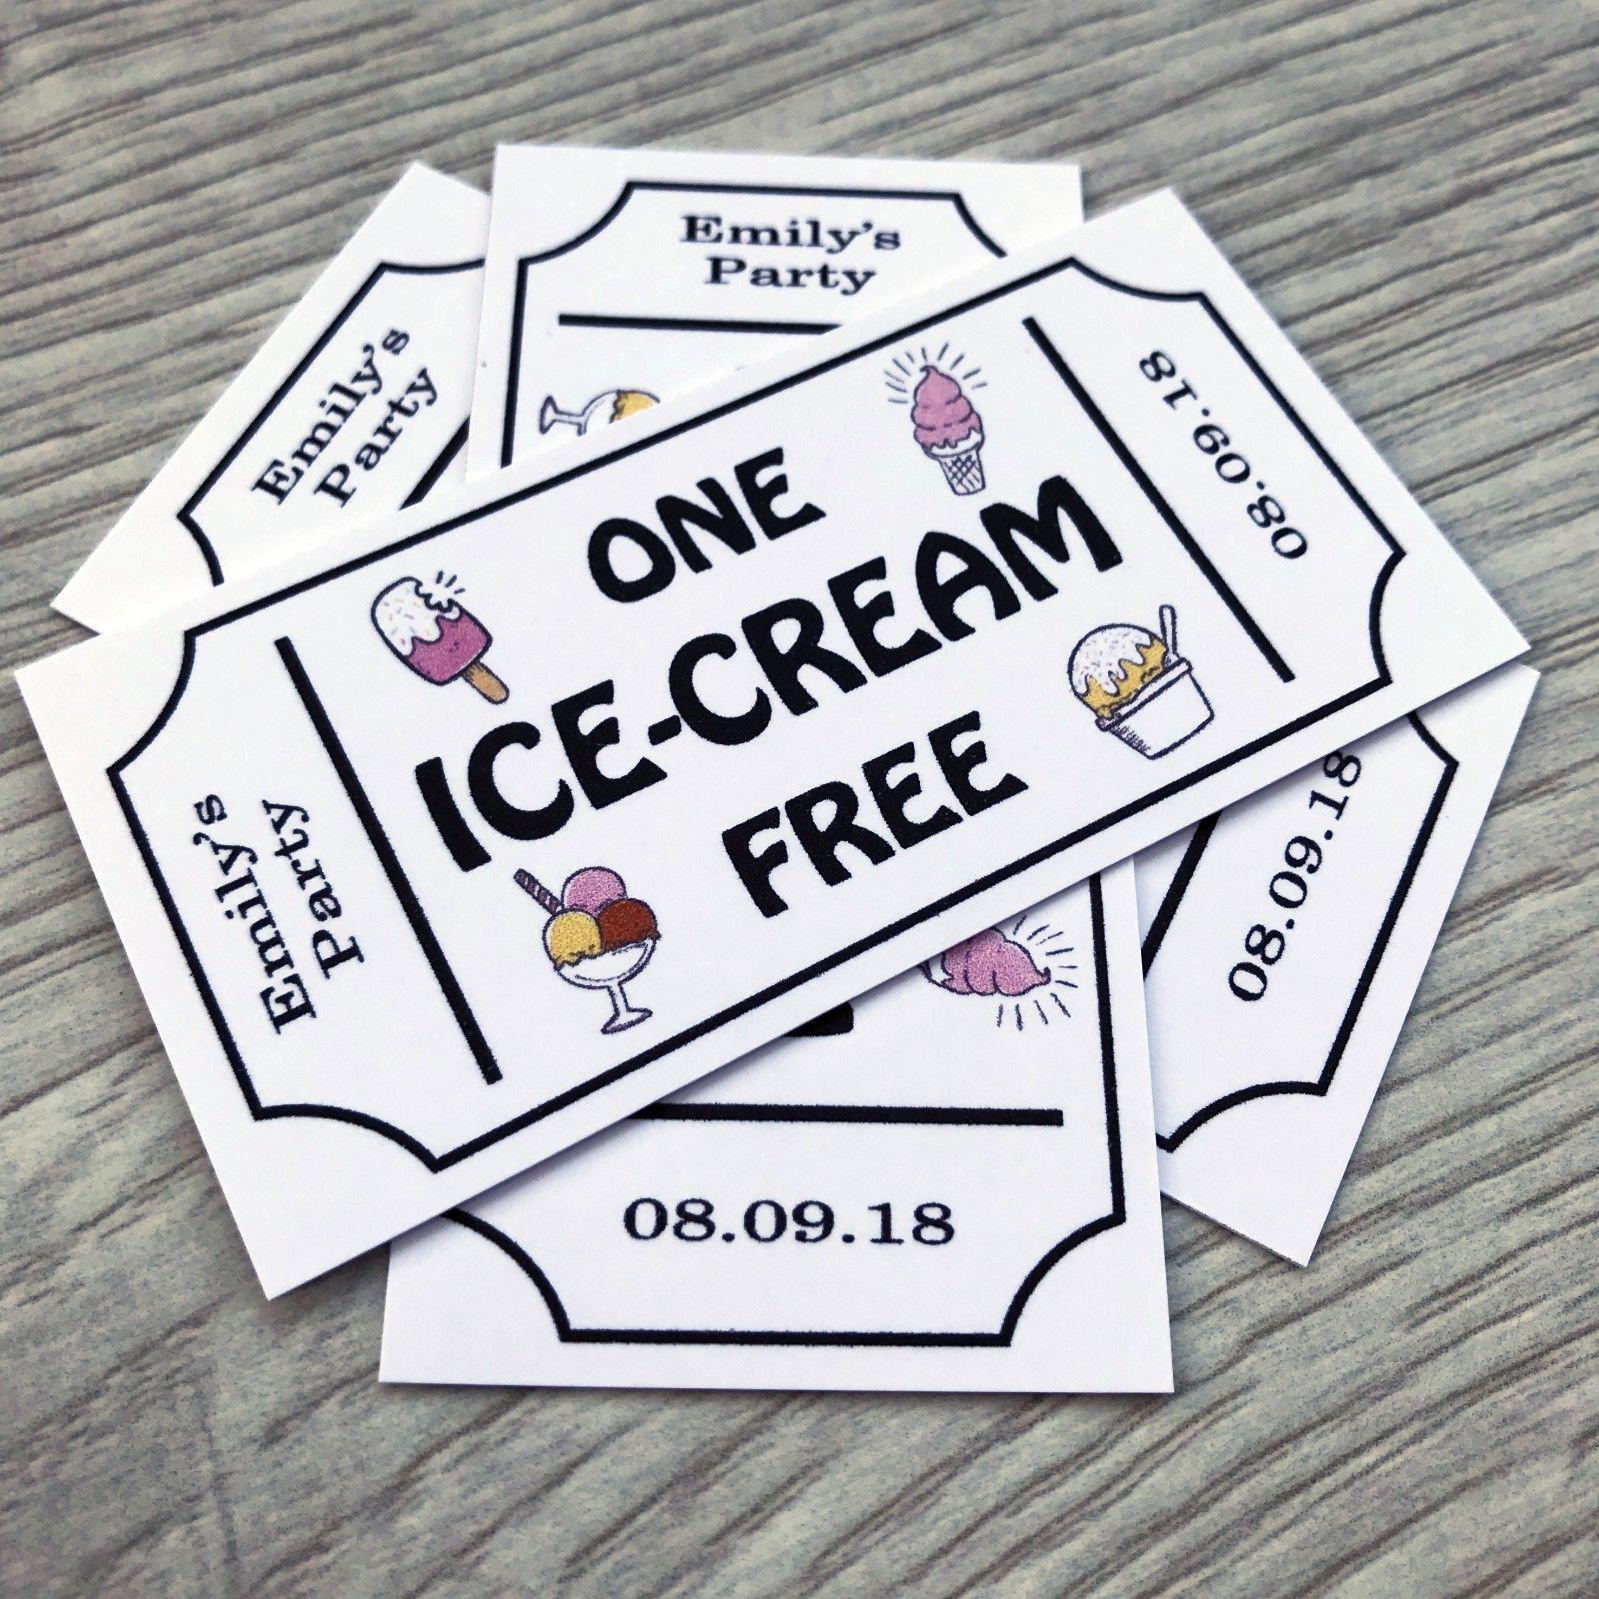 ice cream tokens personalised wedding tickets qty 50 white etsy